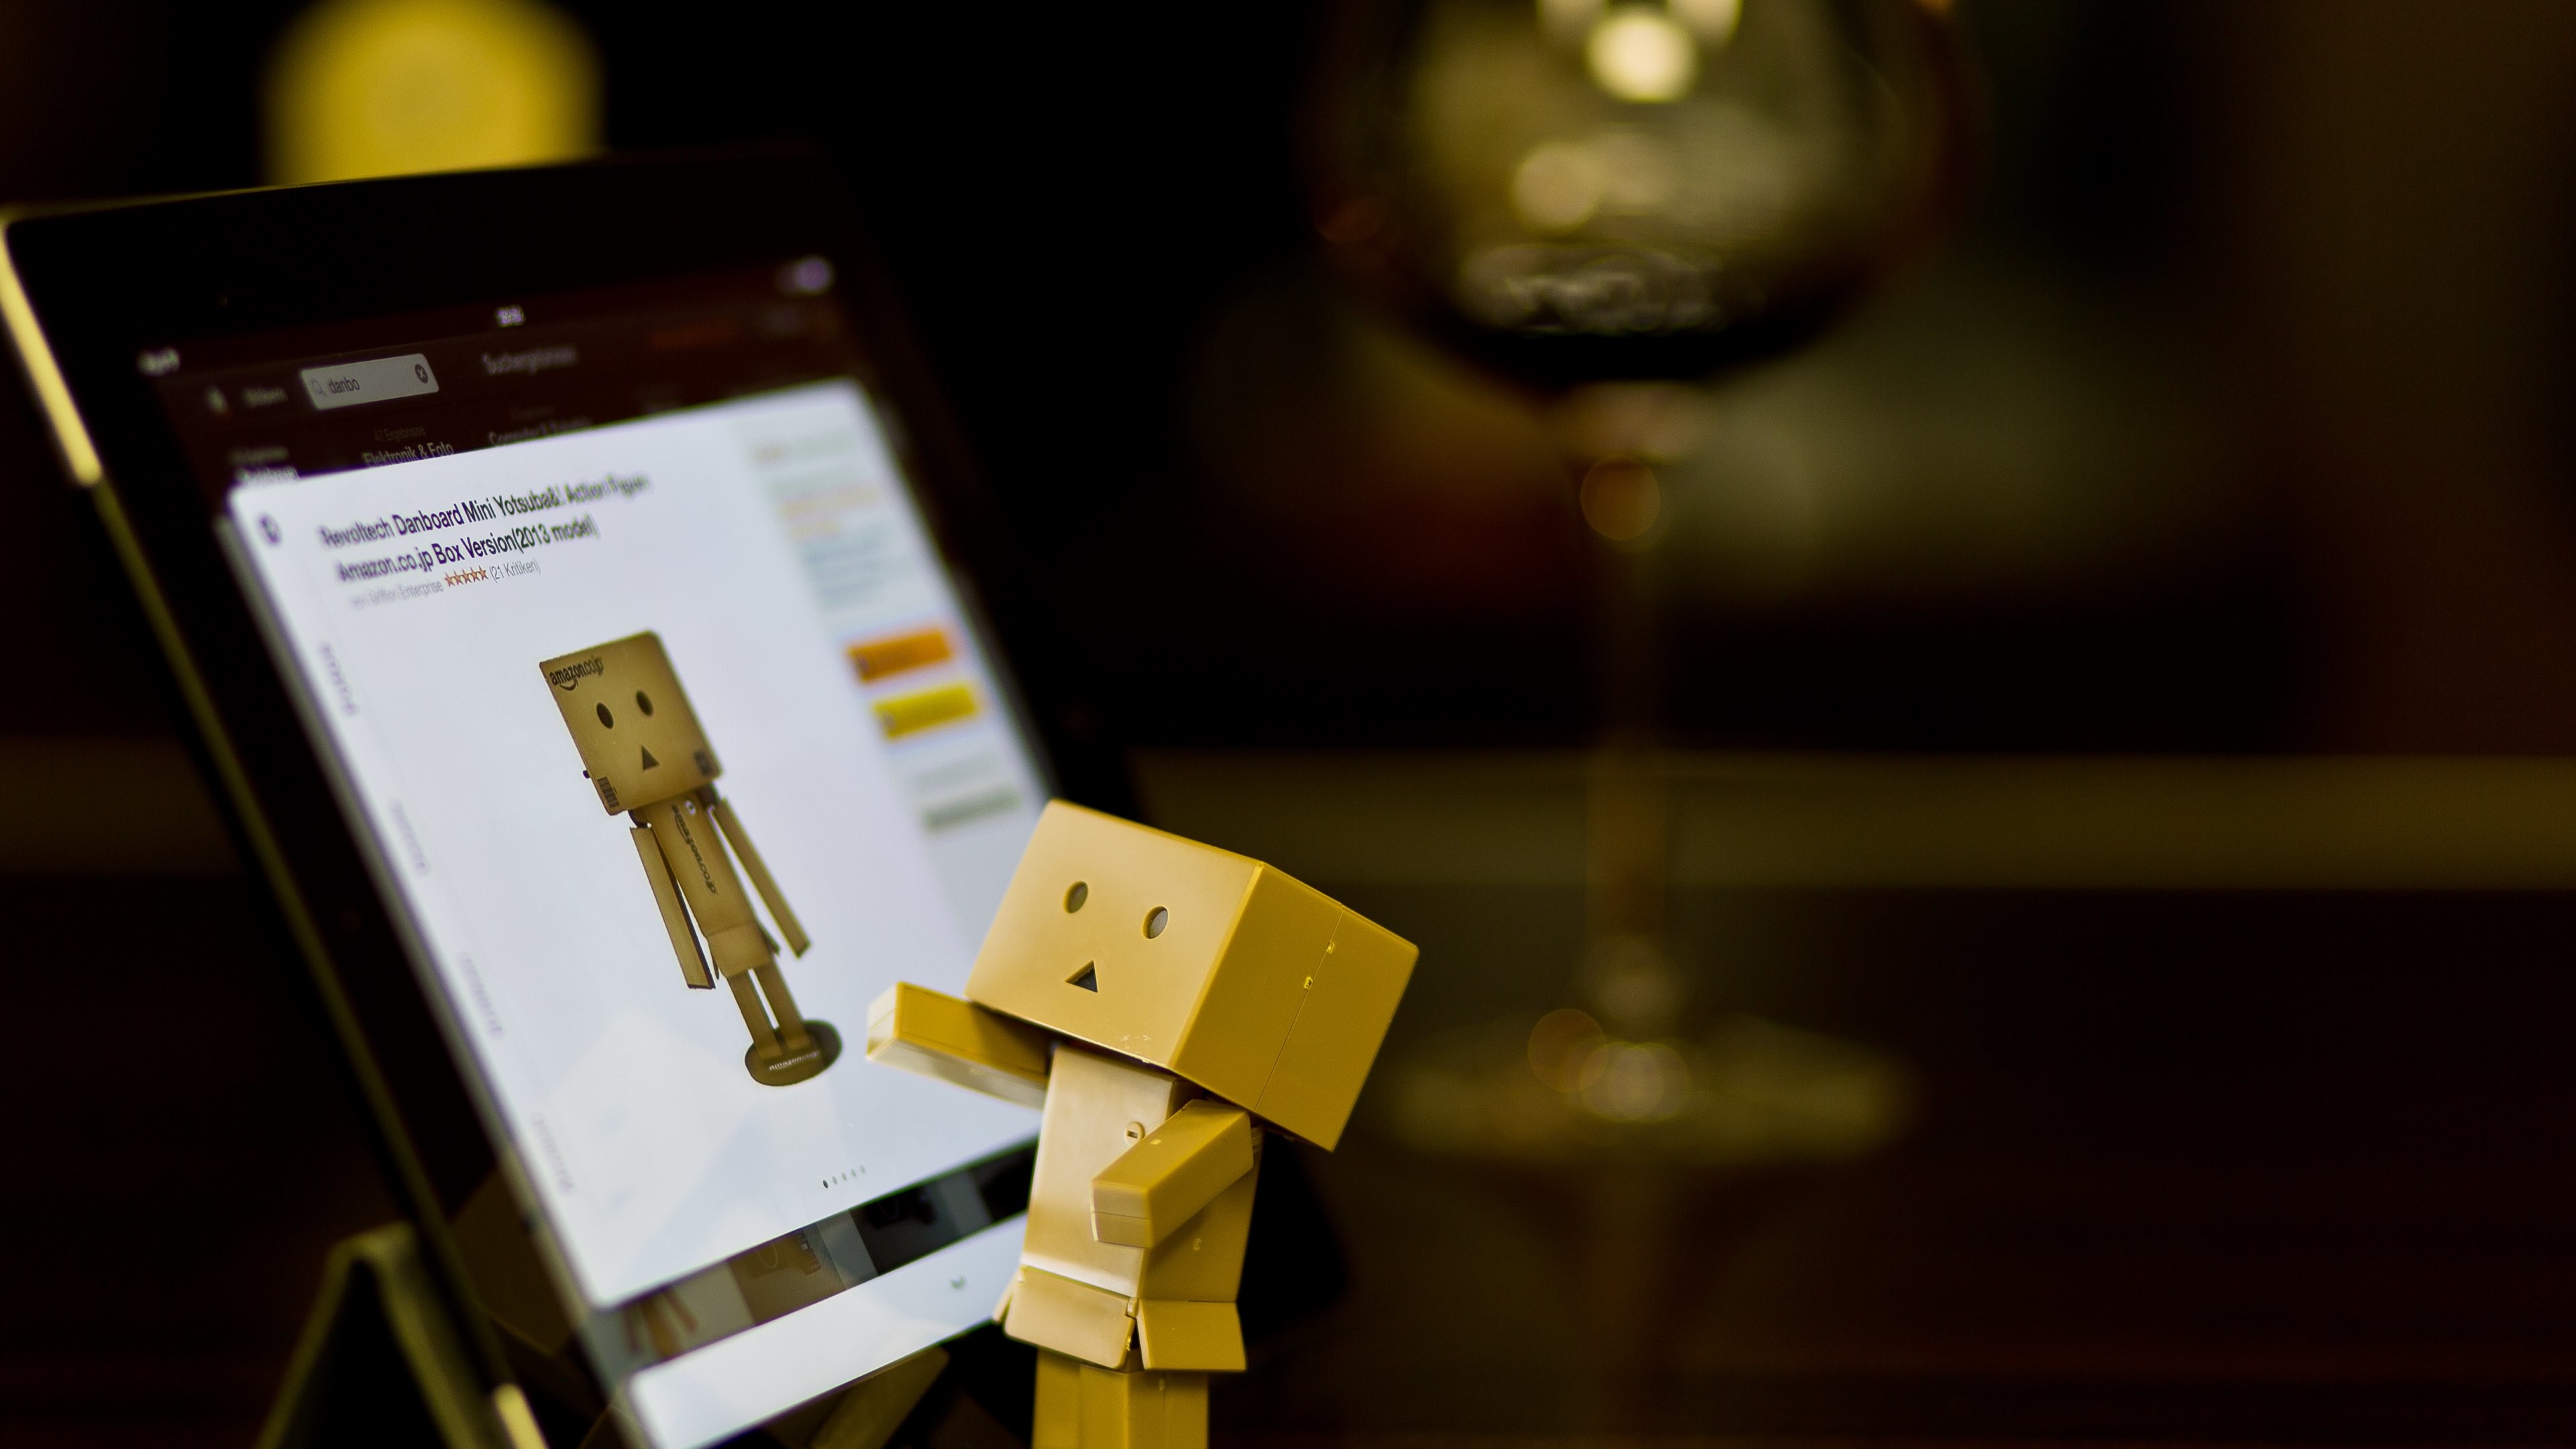 3840x2160 Technology: Danbo with Tablet